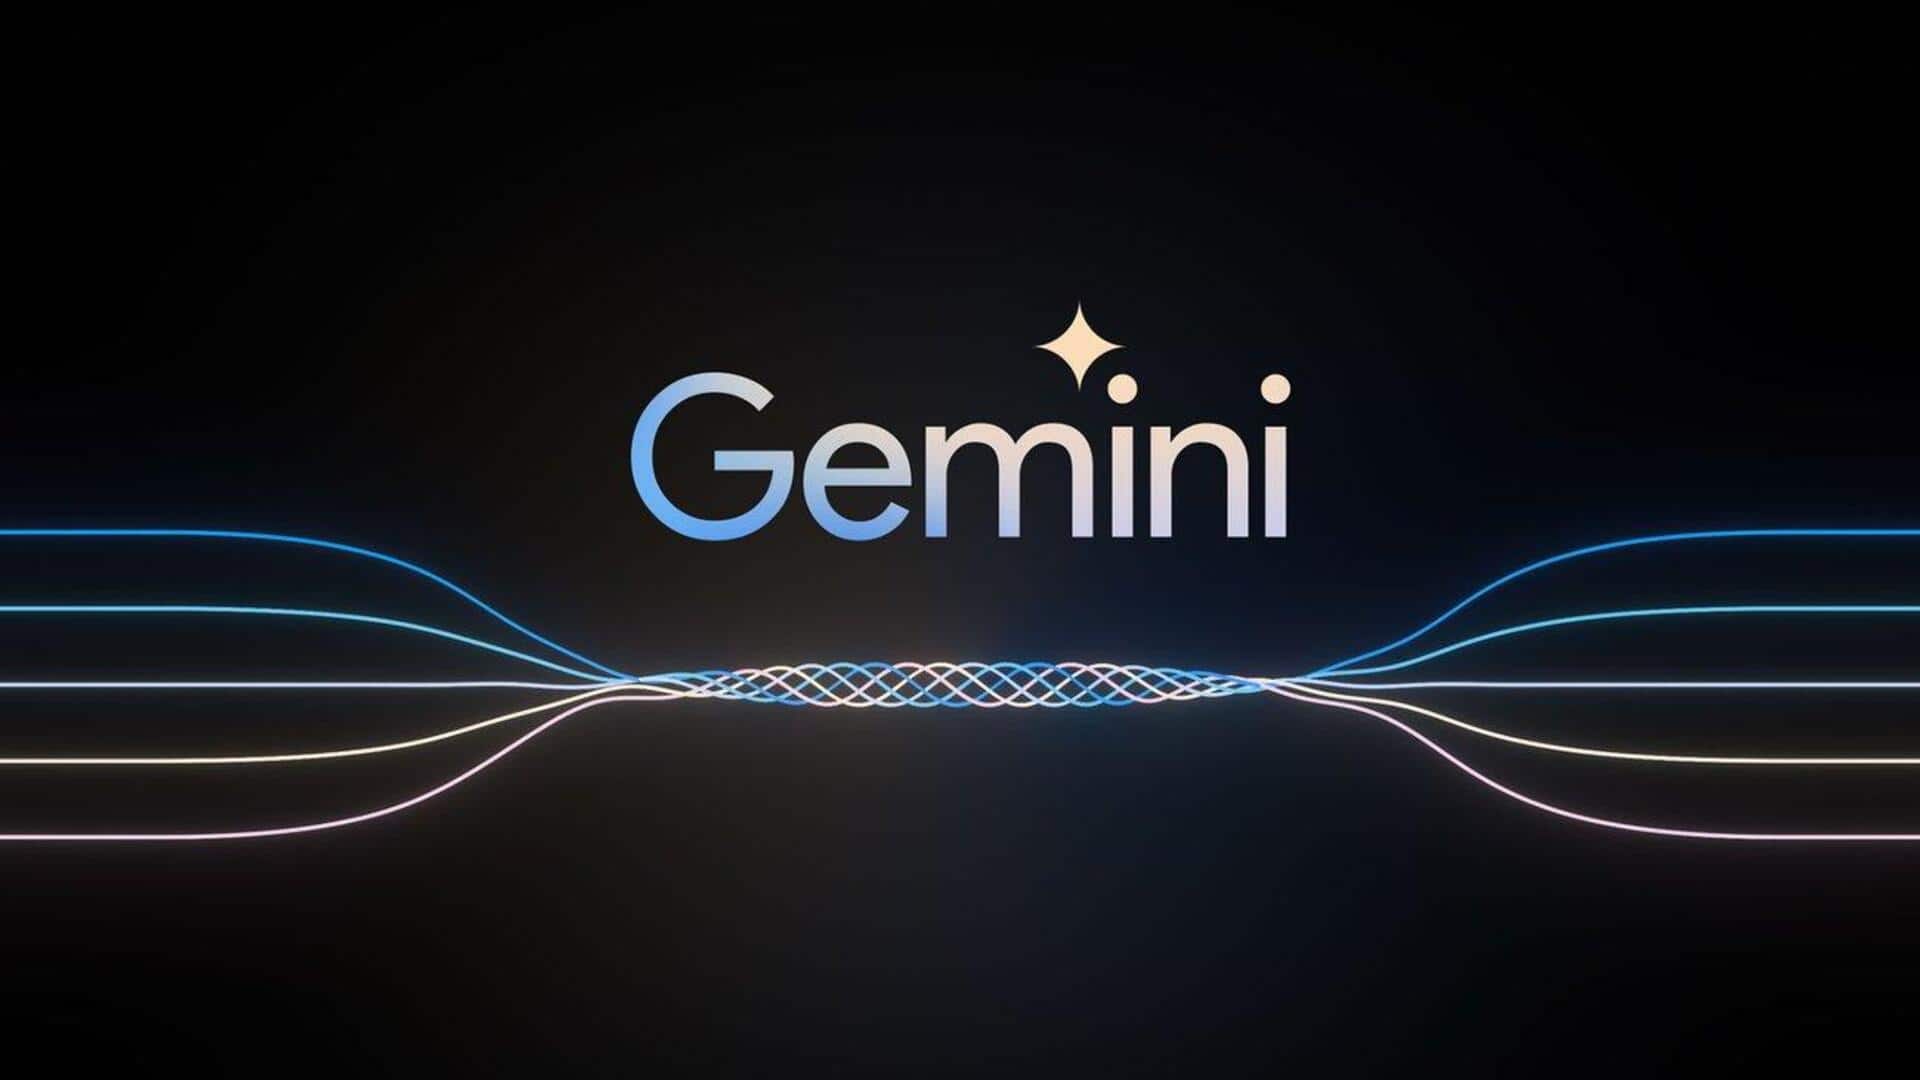 Google's Gemini introduces text modification feature for fine-tuning responses